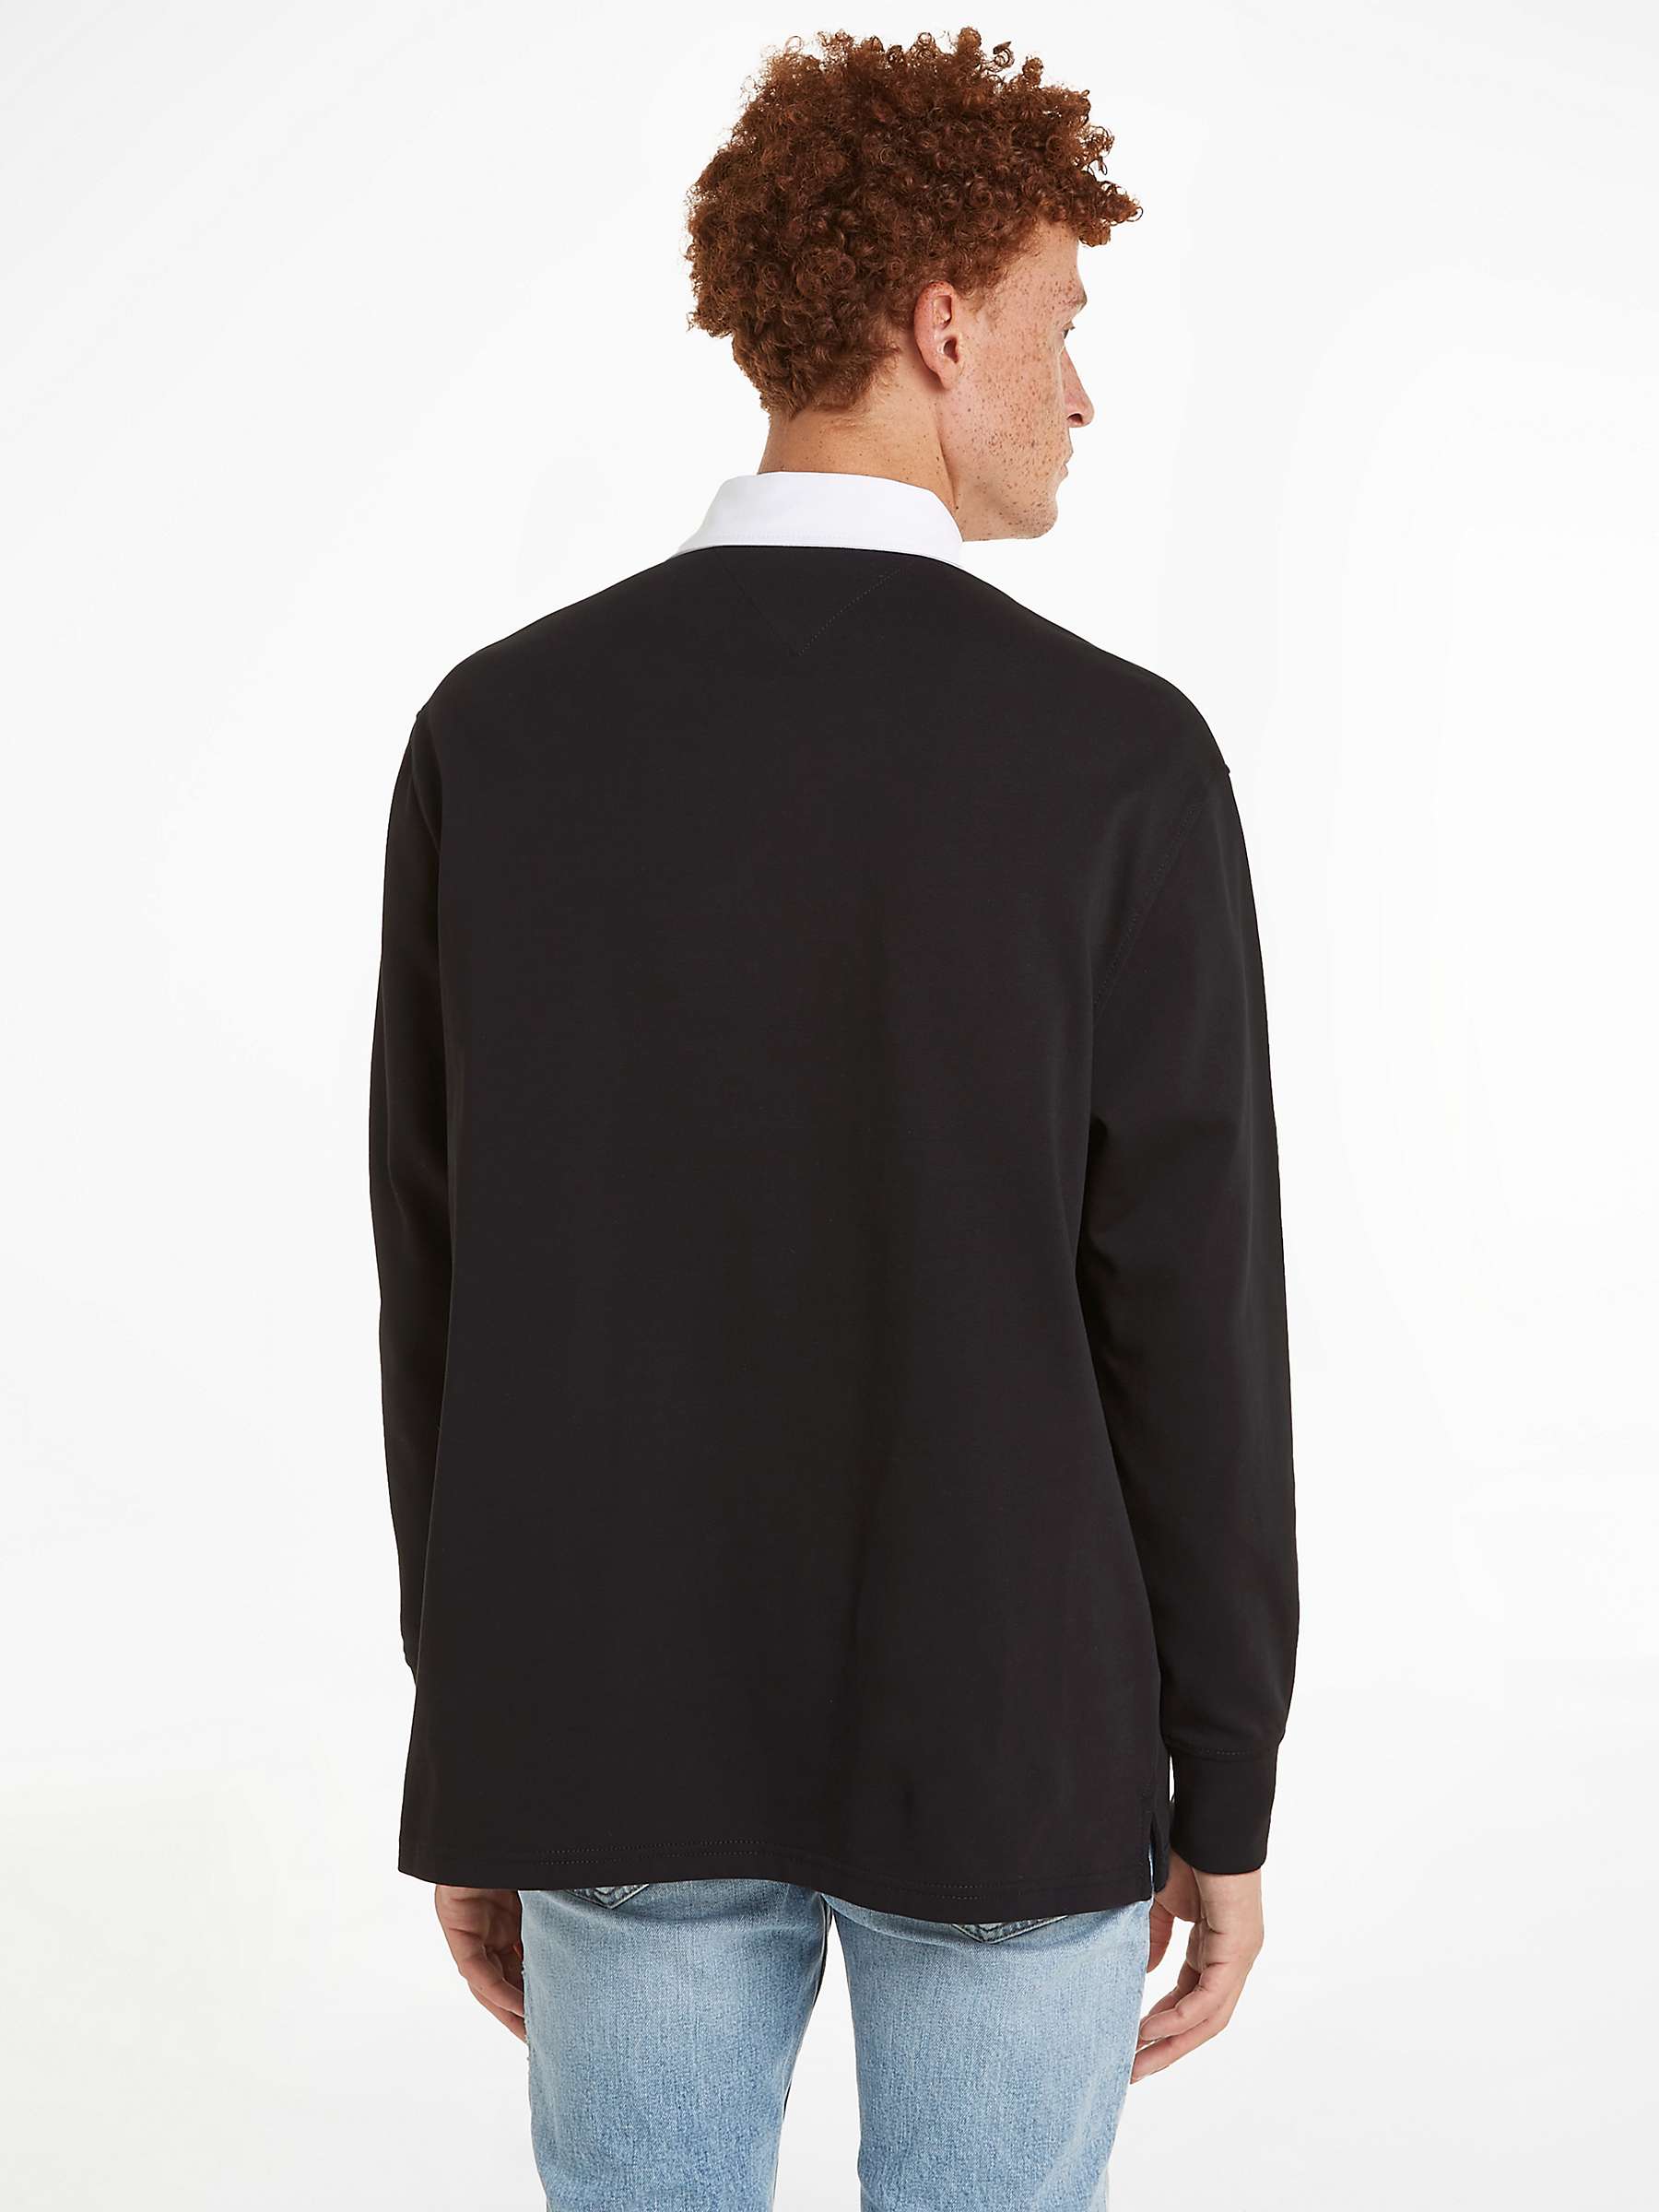 Buy Tommy Jeans Classic Long Sleeve Rugby Top, Black Online at johnlewis.com